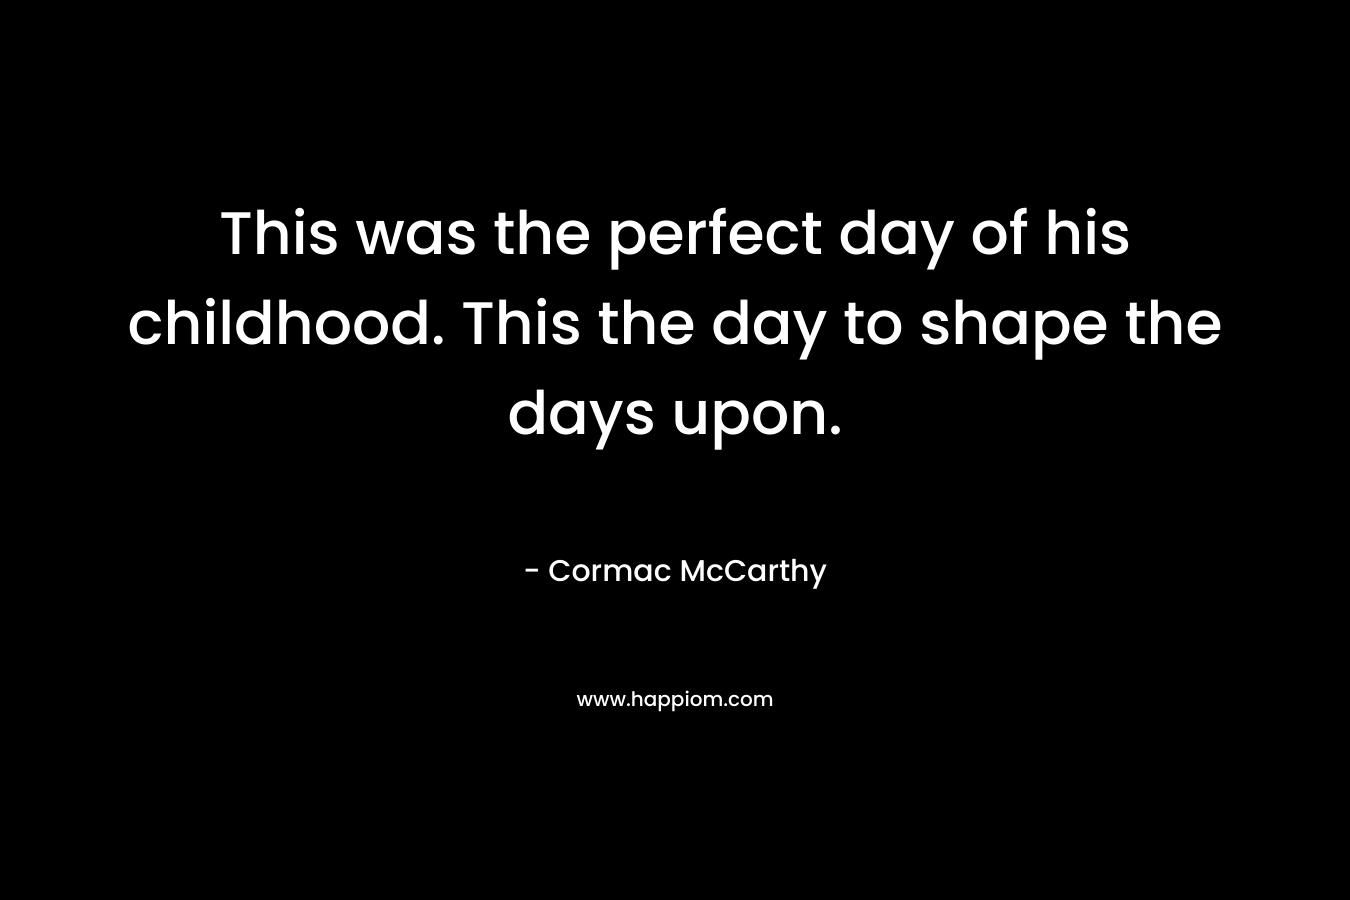 This was the perfect day of his childhood. This the day to shape the days upon.